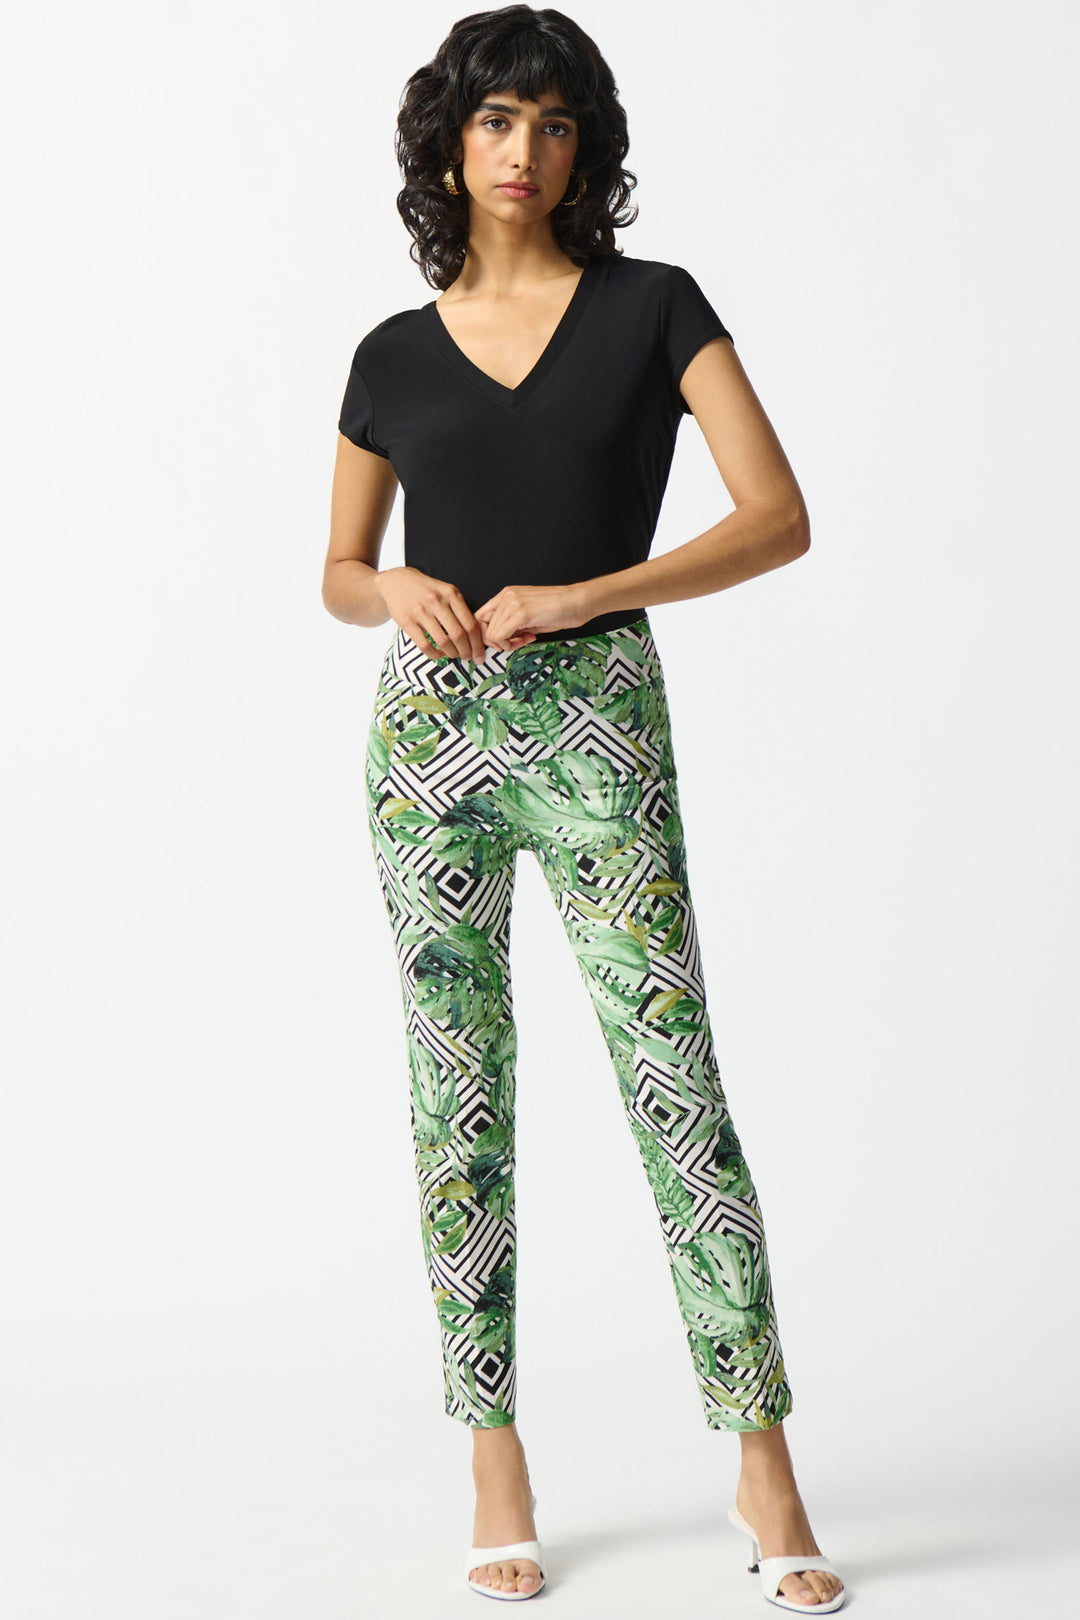  The rad jungle print pattern adds a touch of wild to your wardrobe, while the mid-rise waistband and ankle length provide comfort and style.